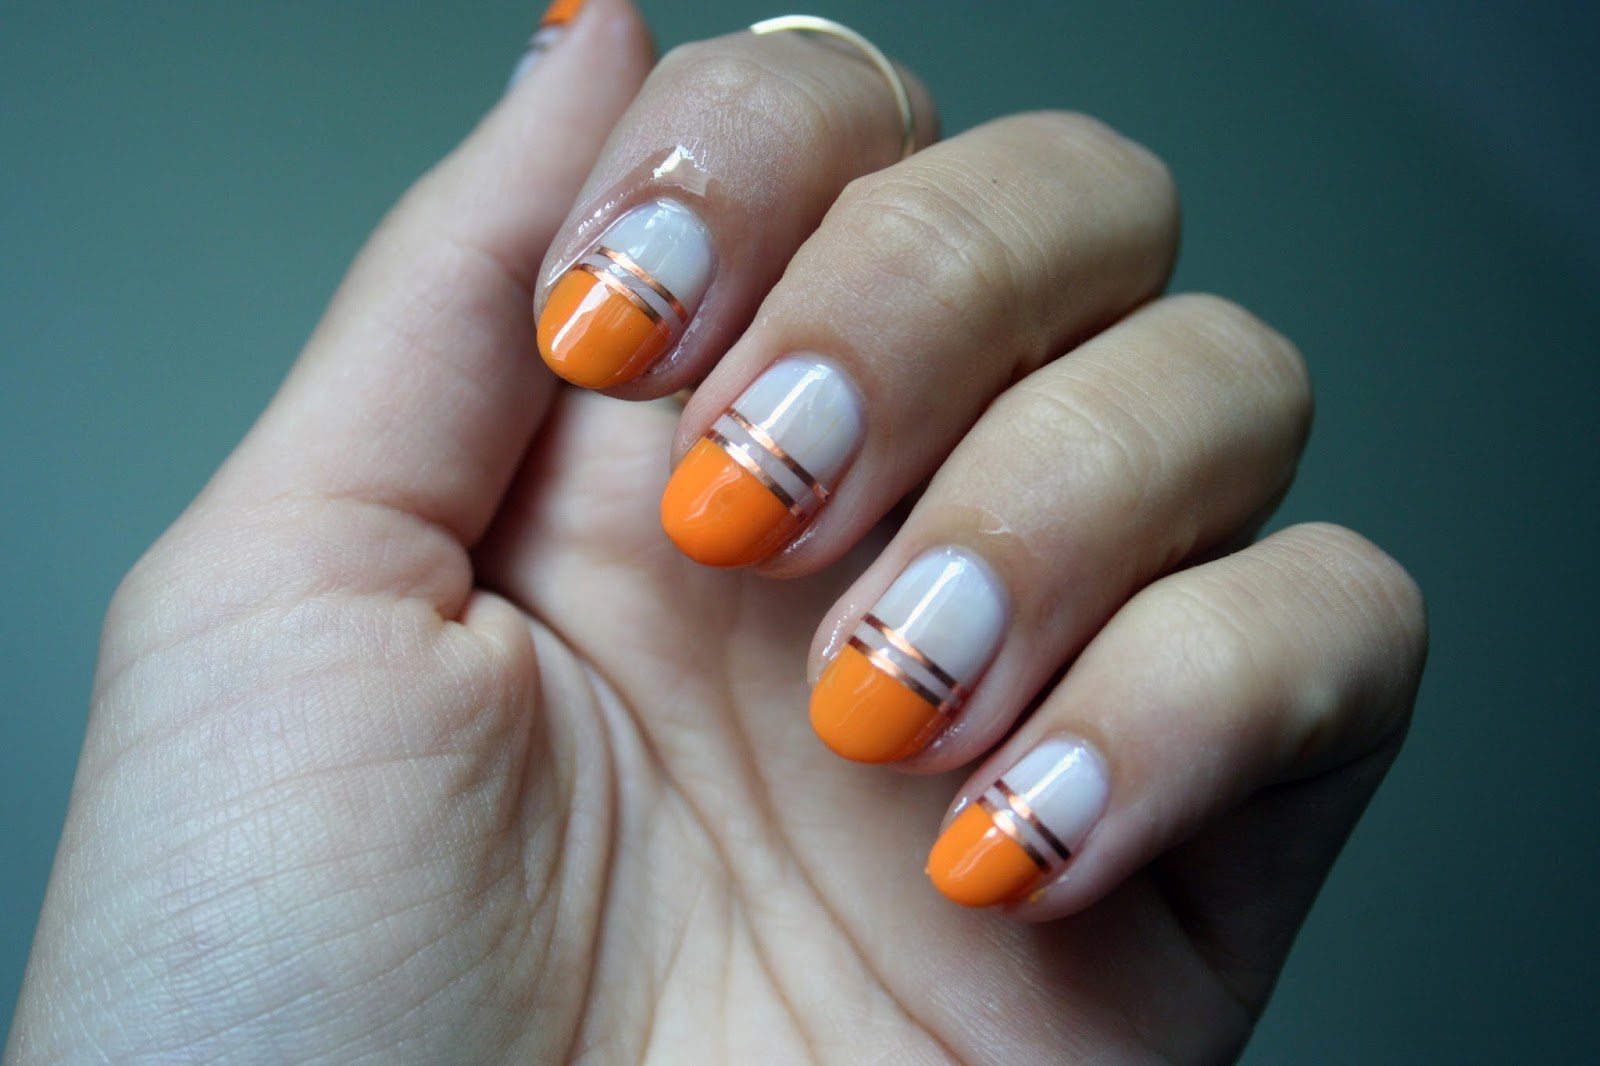 8. Creative Tape Nail Art Designs for Short Nails - wide 2